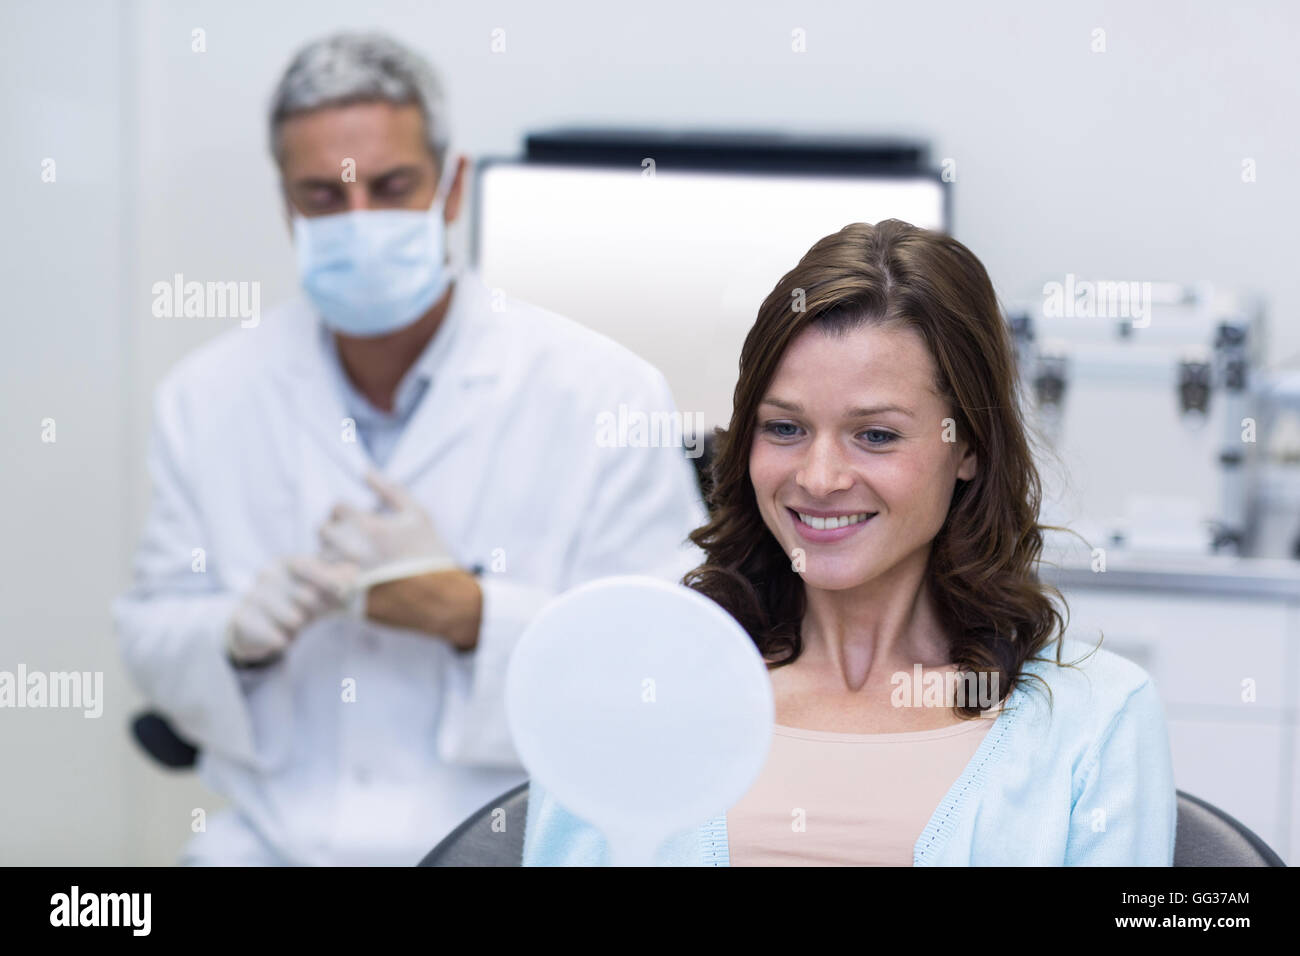 Patient checking her teeth in mirror Stock Photo